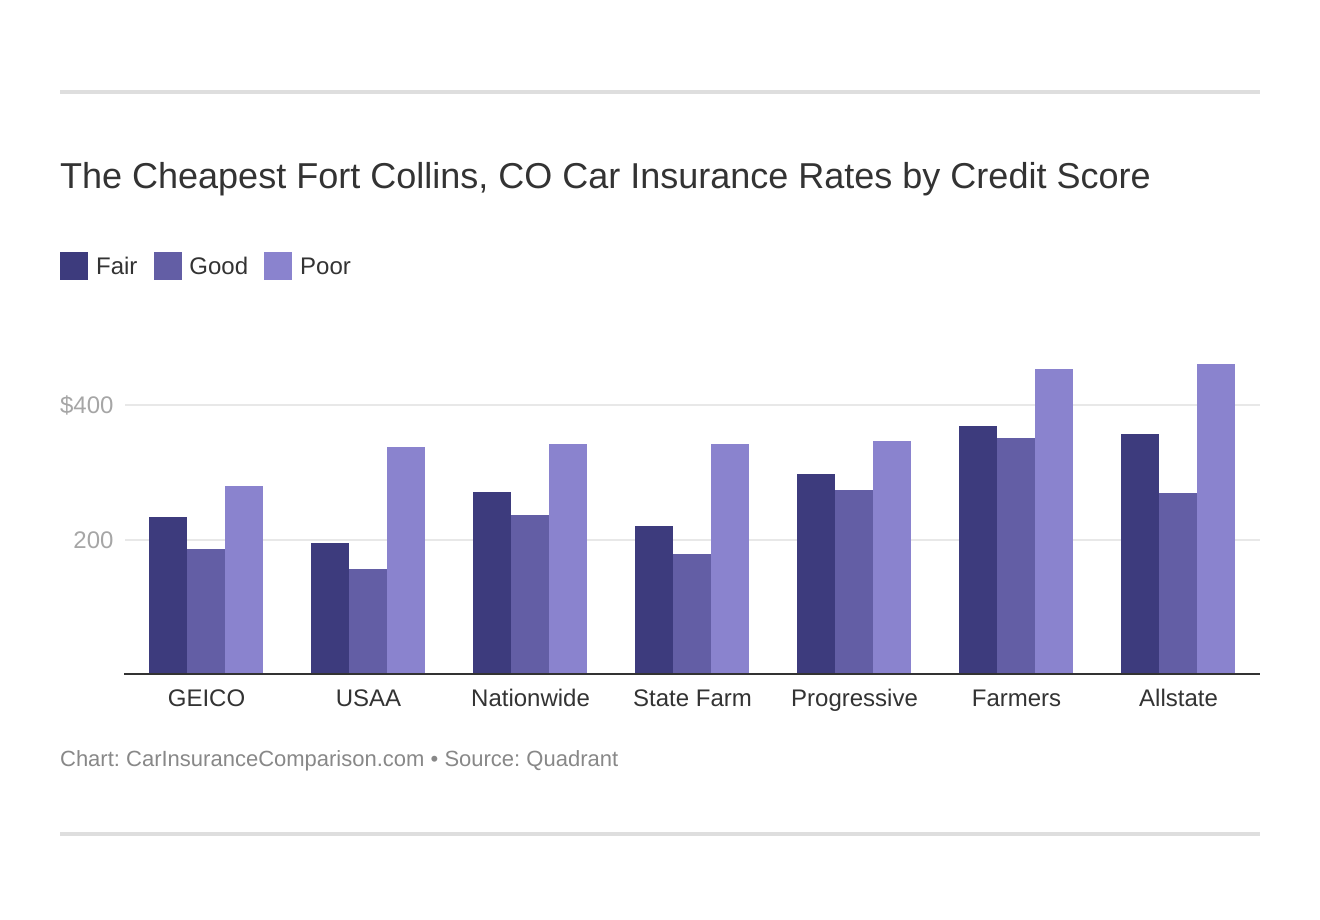 The Cheapest Fort Collins, CO Car Insurance Rates by Credit Score